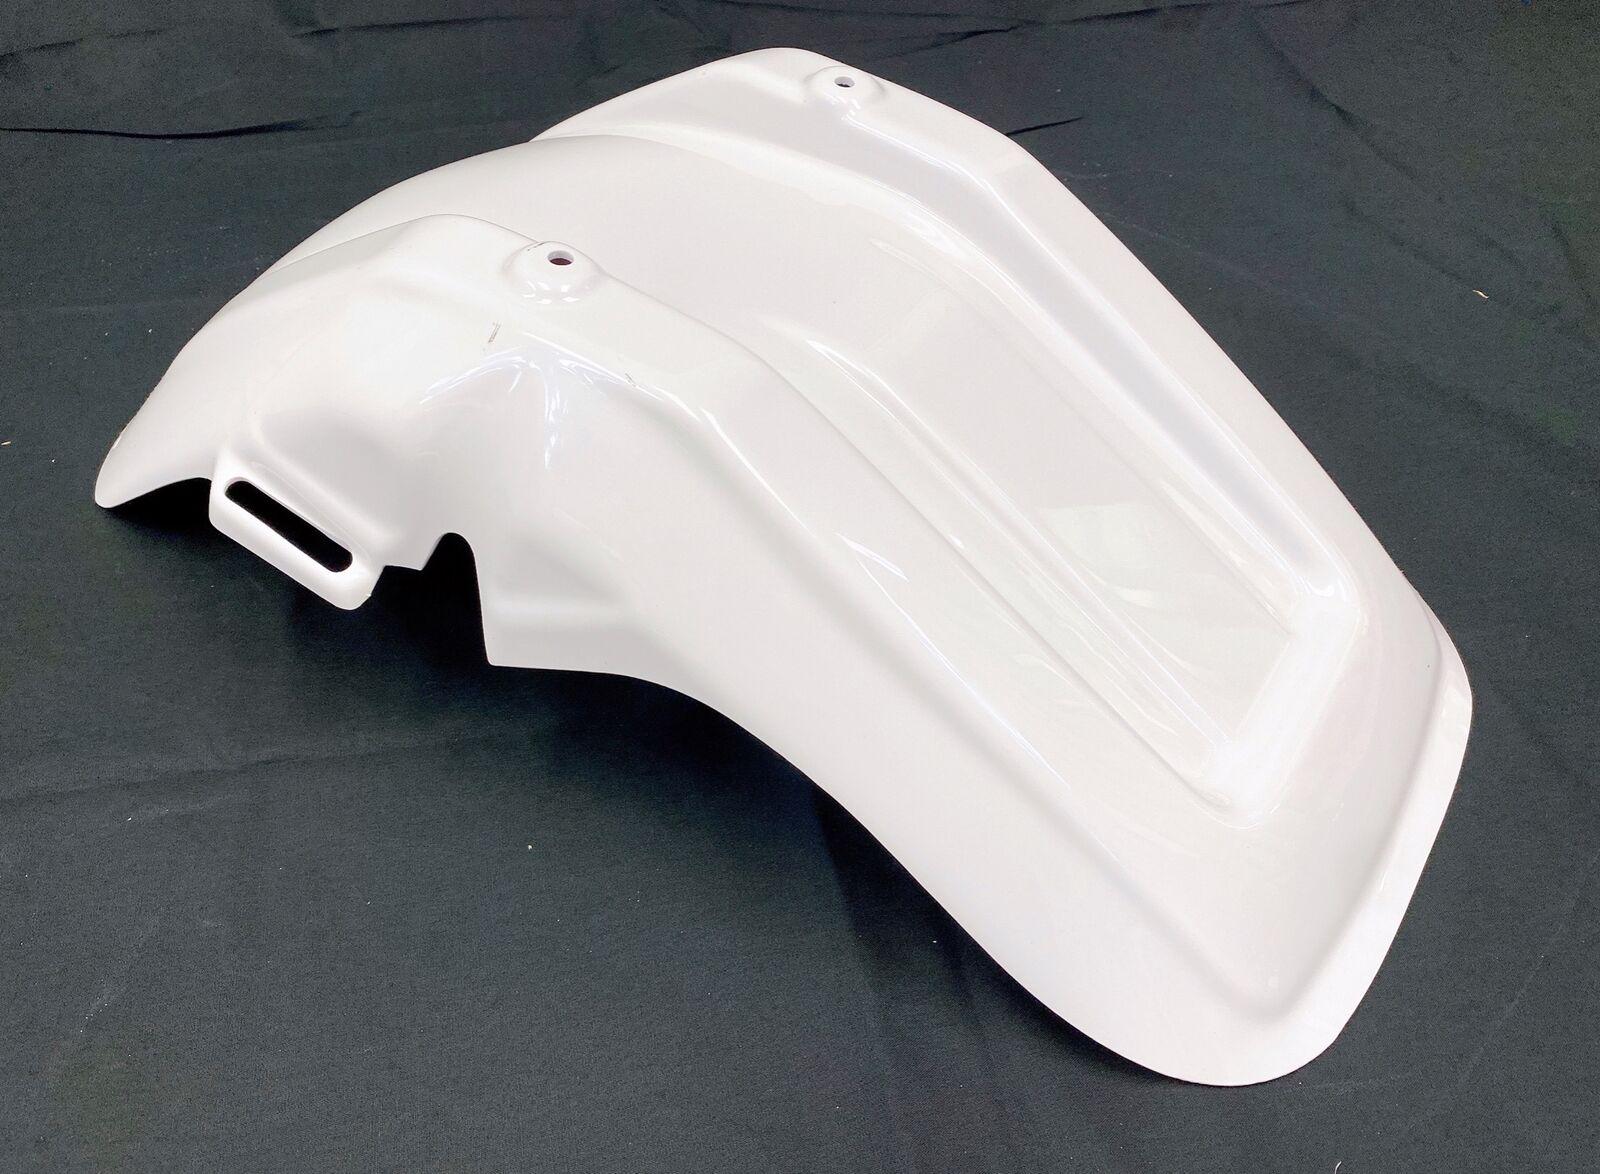 KTX Pro Inc Front Fender - Powersports ATC Accessories Compatible with Honda 1982 - 1984 ATC200ES, - Heavy-Duty TPO Plastic Replacement Parts, High Gloss Finish - Black, Red, White